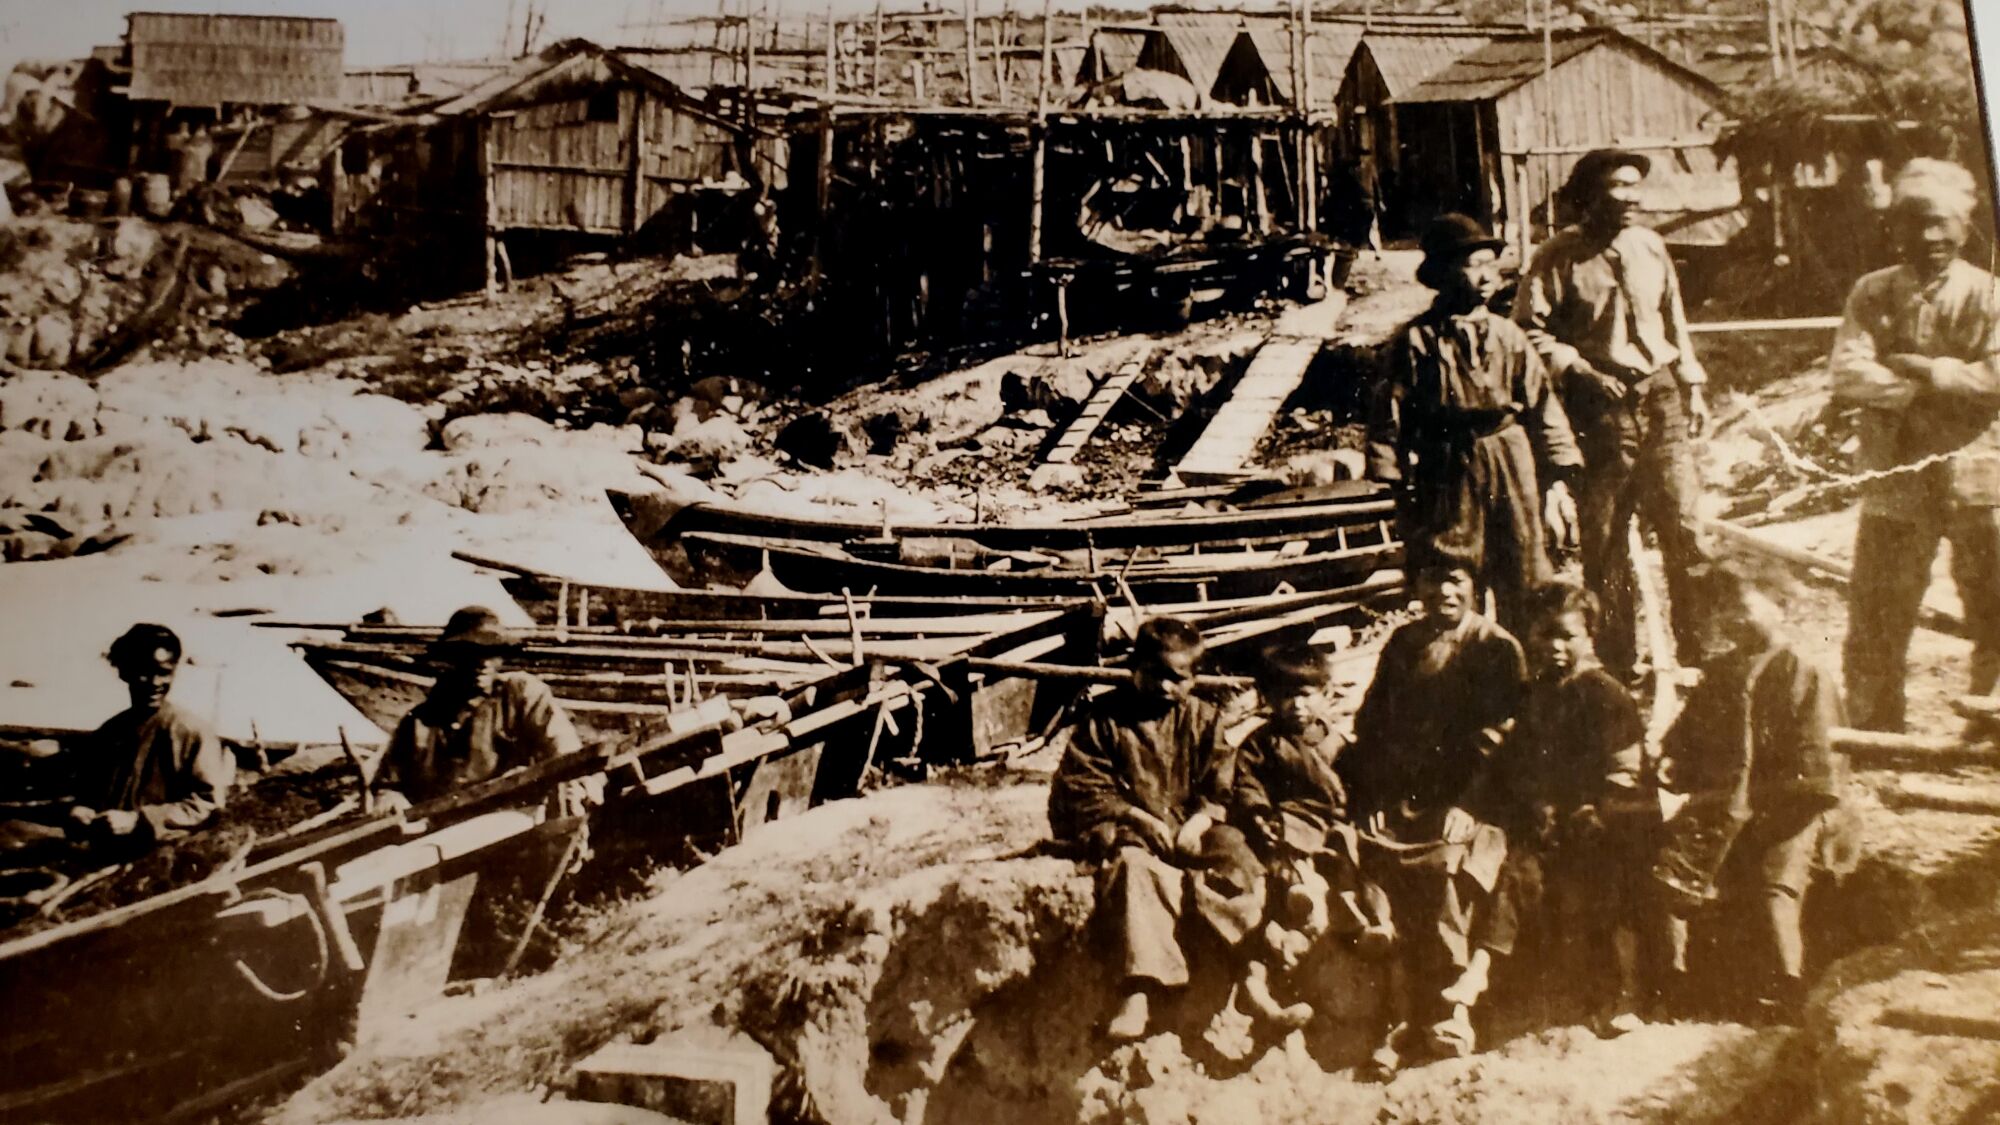 A historic black-and-white photo of fishermen and children of Chinese descent near a cluster of wooden boats and houses.